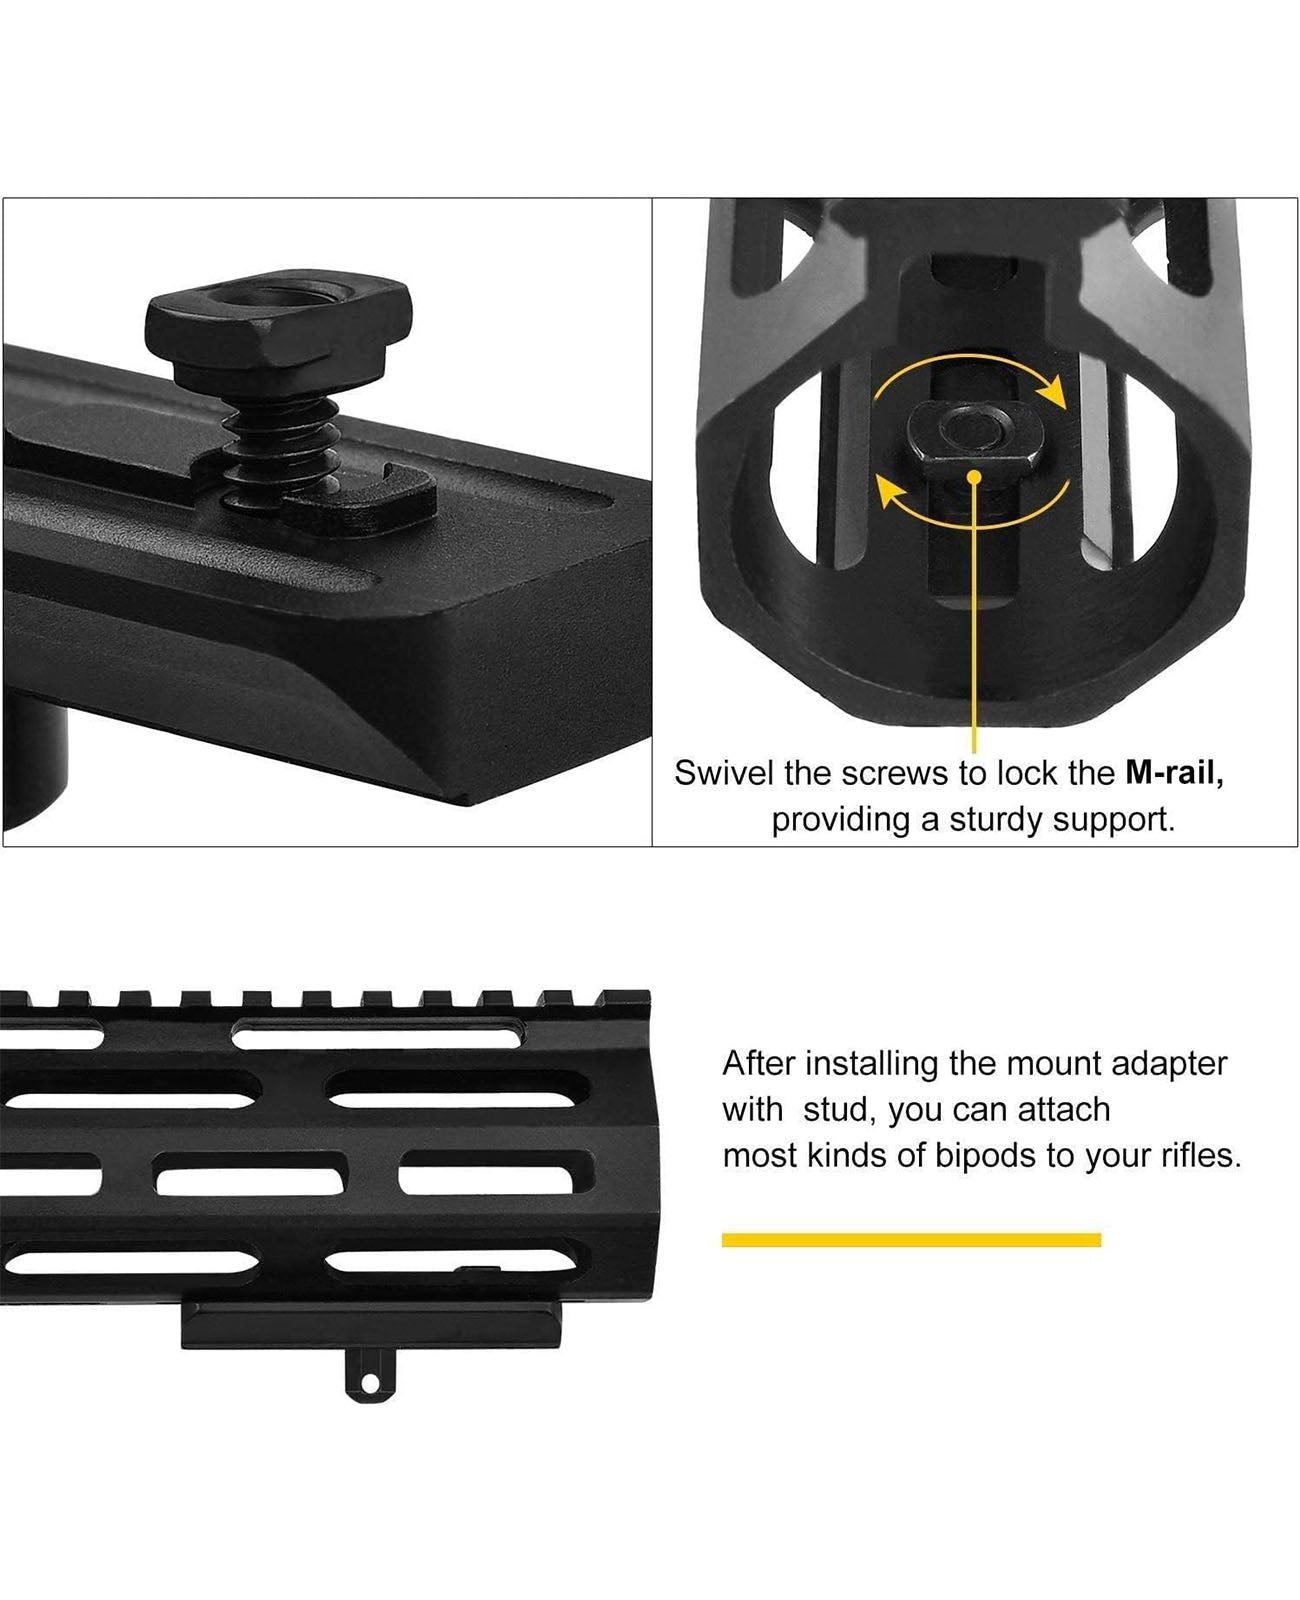 Bipod Adapter Help to Attach Most of Bipods for Rifles